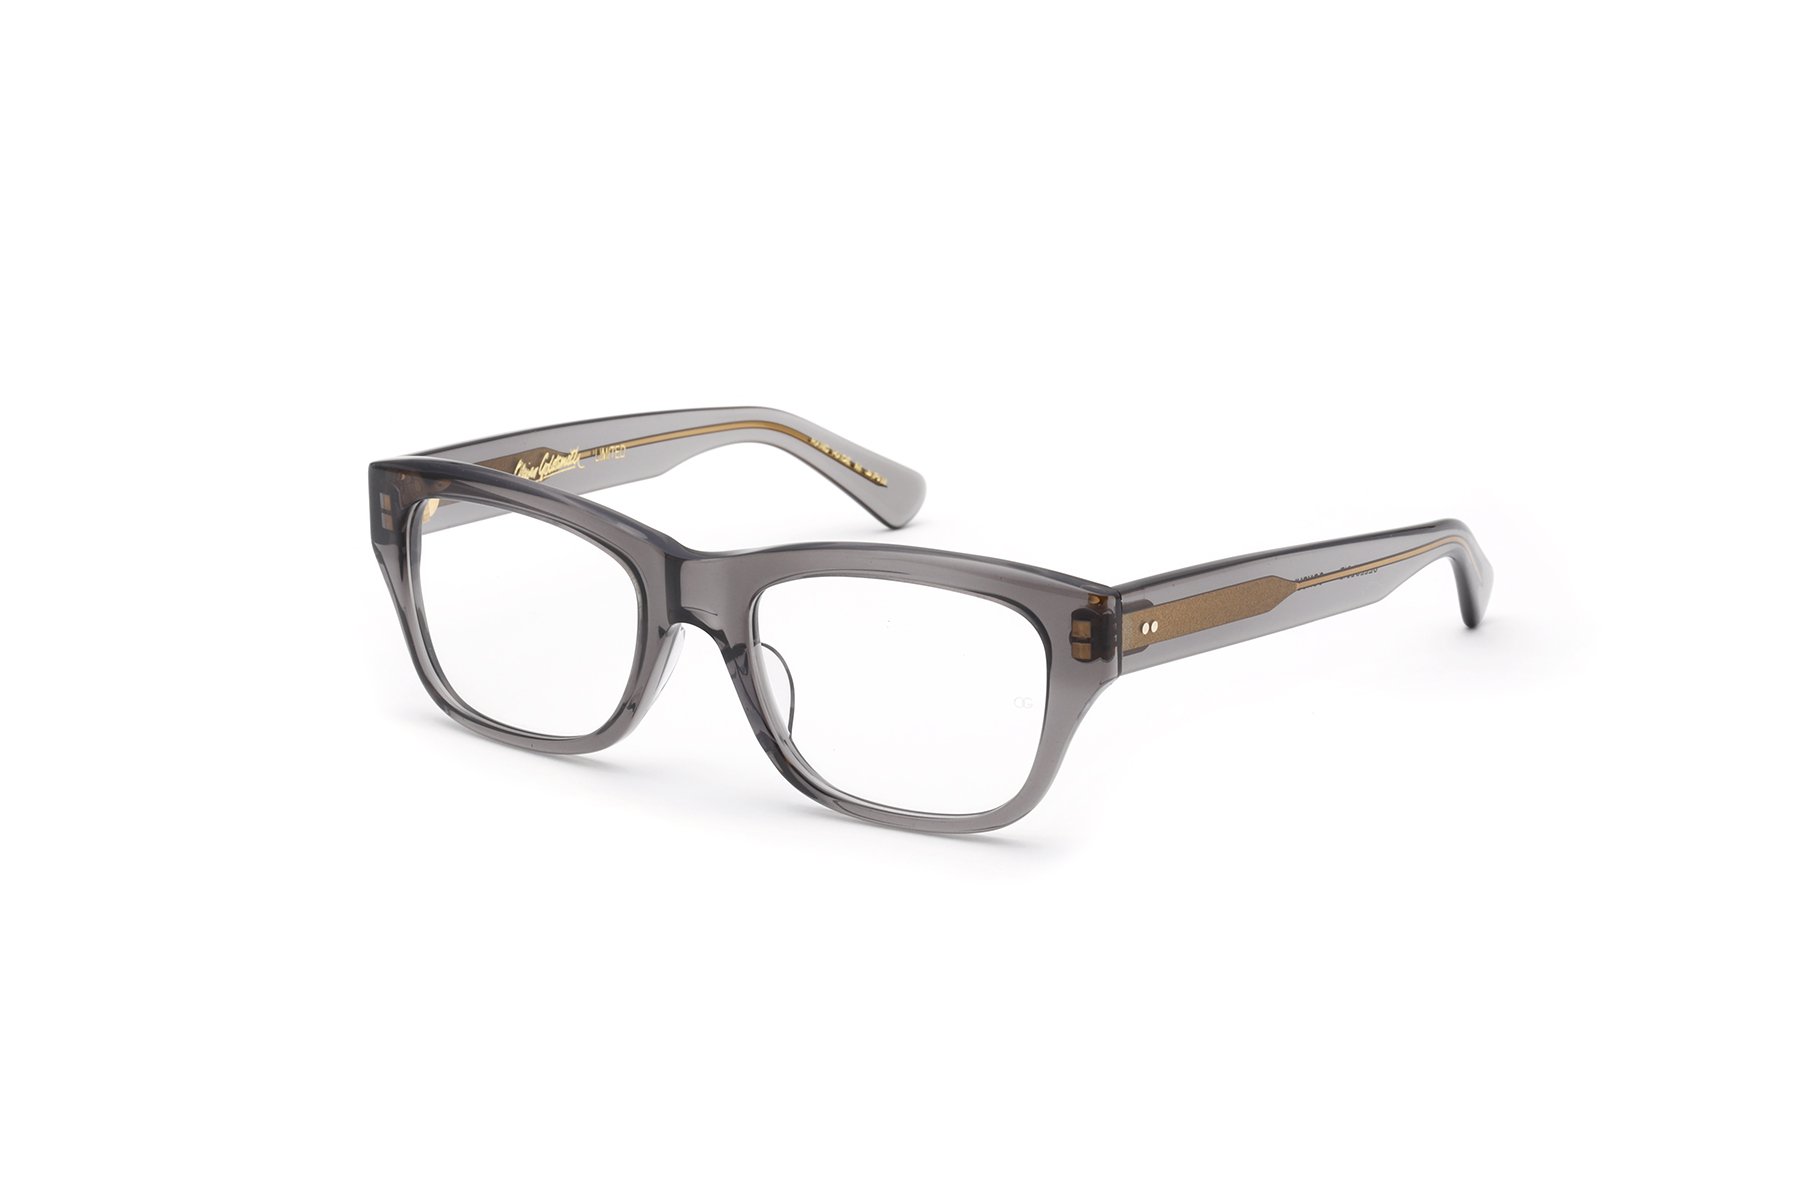 CONSUL-s-CELLULOID-GY(LIMITED MODEL) - decora/G.B.Gafas ONLINE